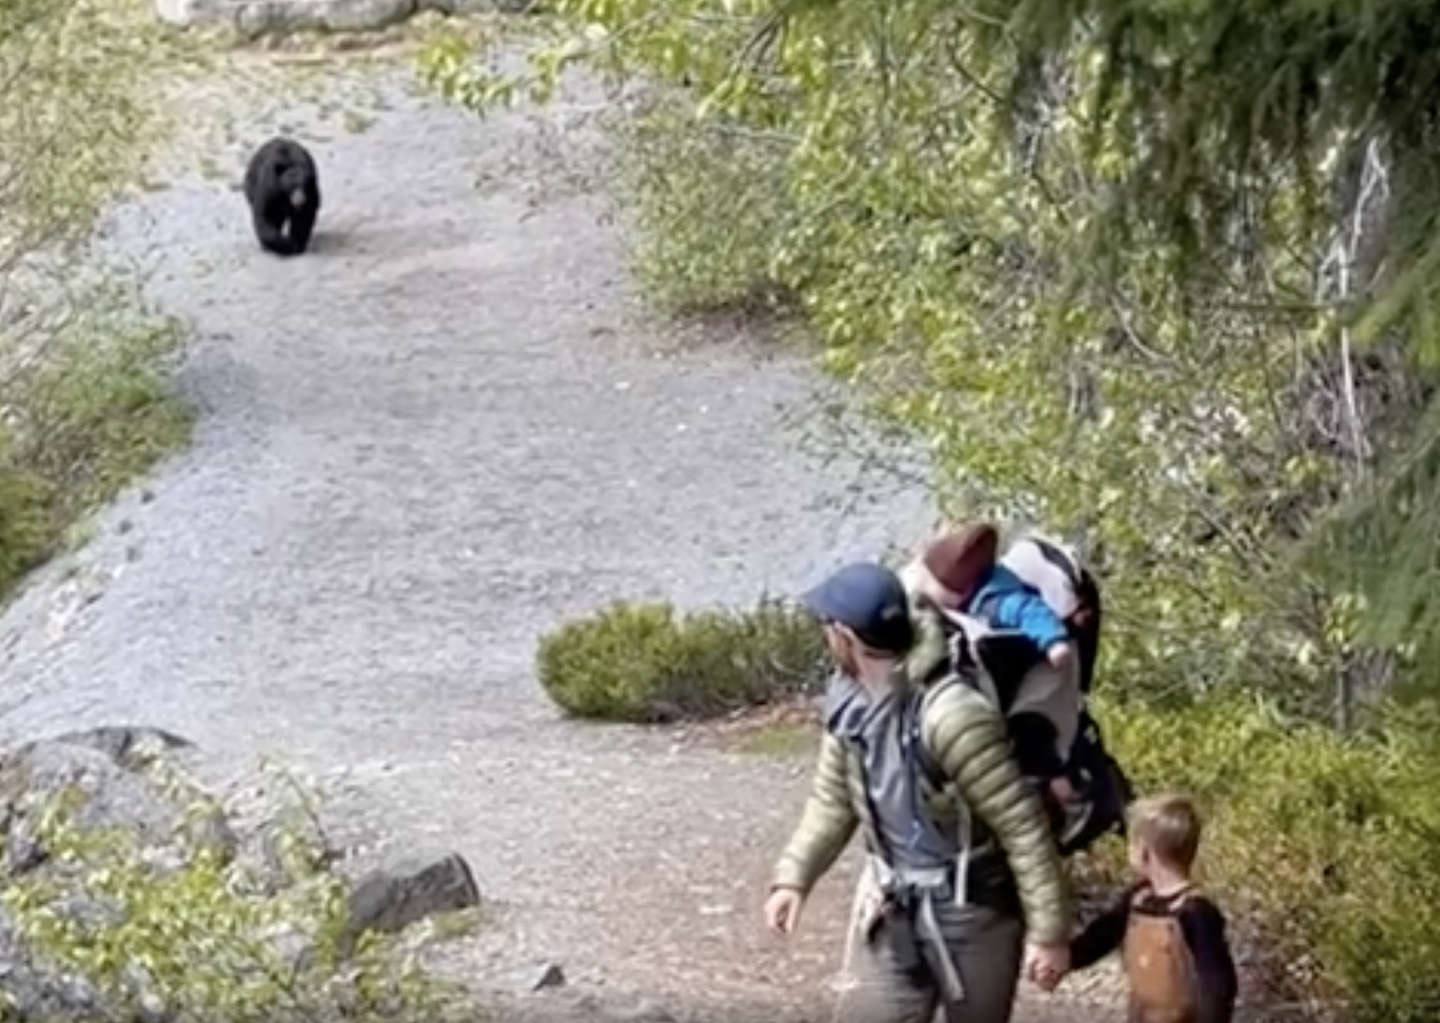 Watch a black bear stalk a family on a hiking trail for half a mile